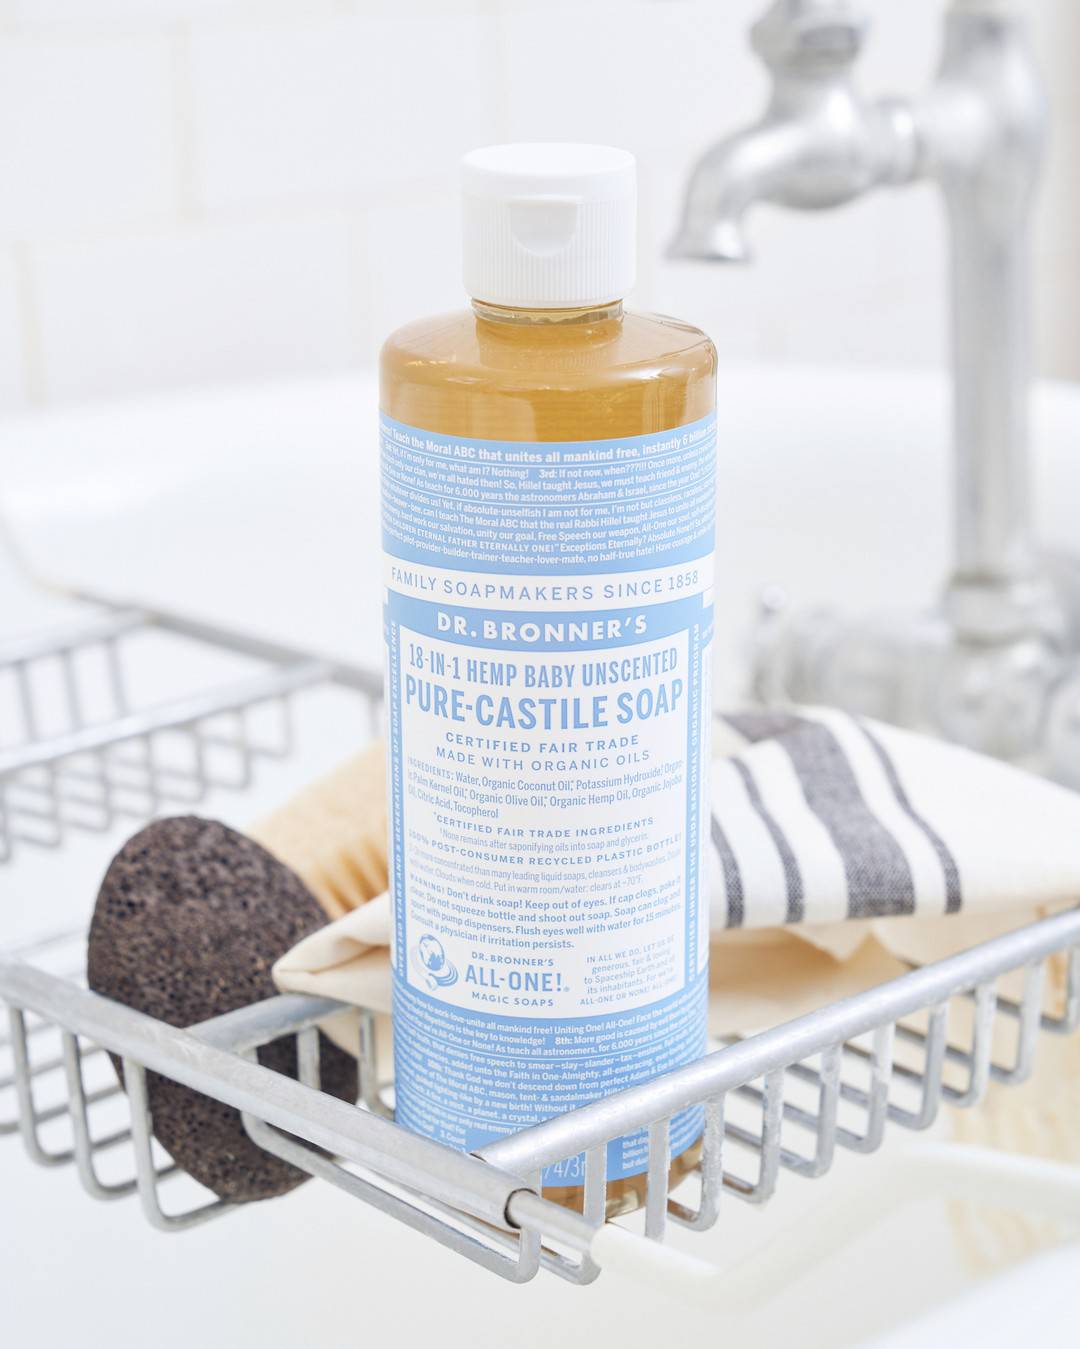 a bottle of dr bronner's pure castile soap on a soap tray